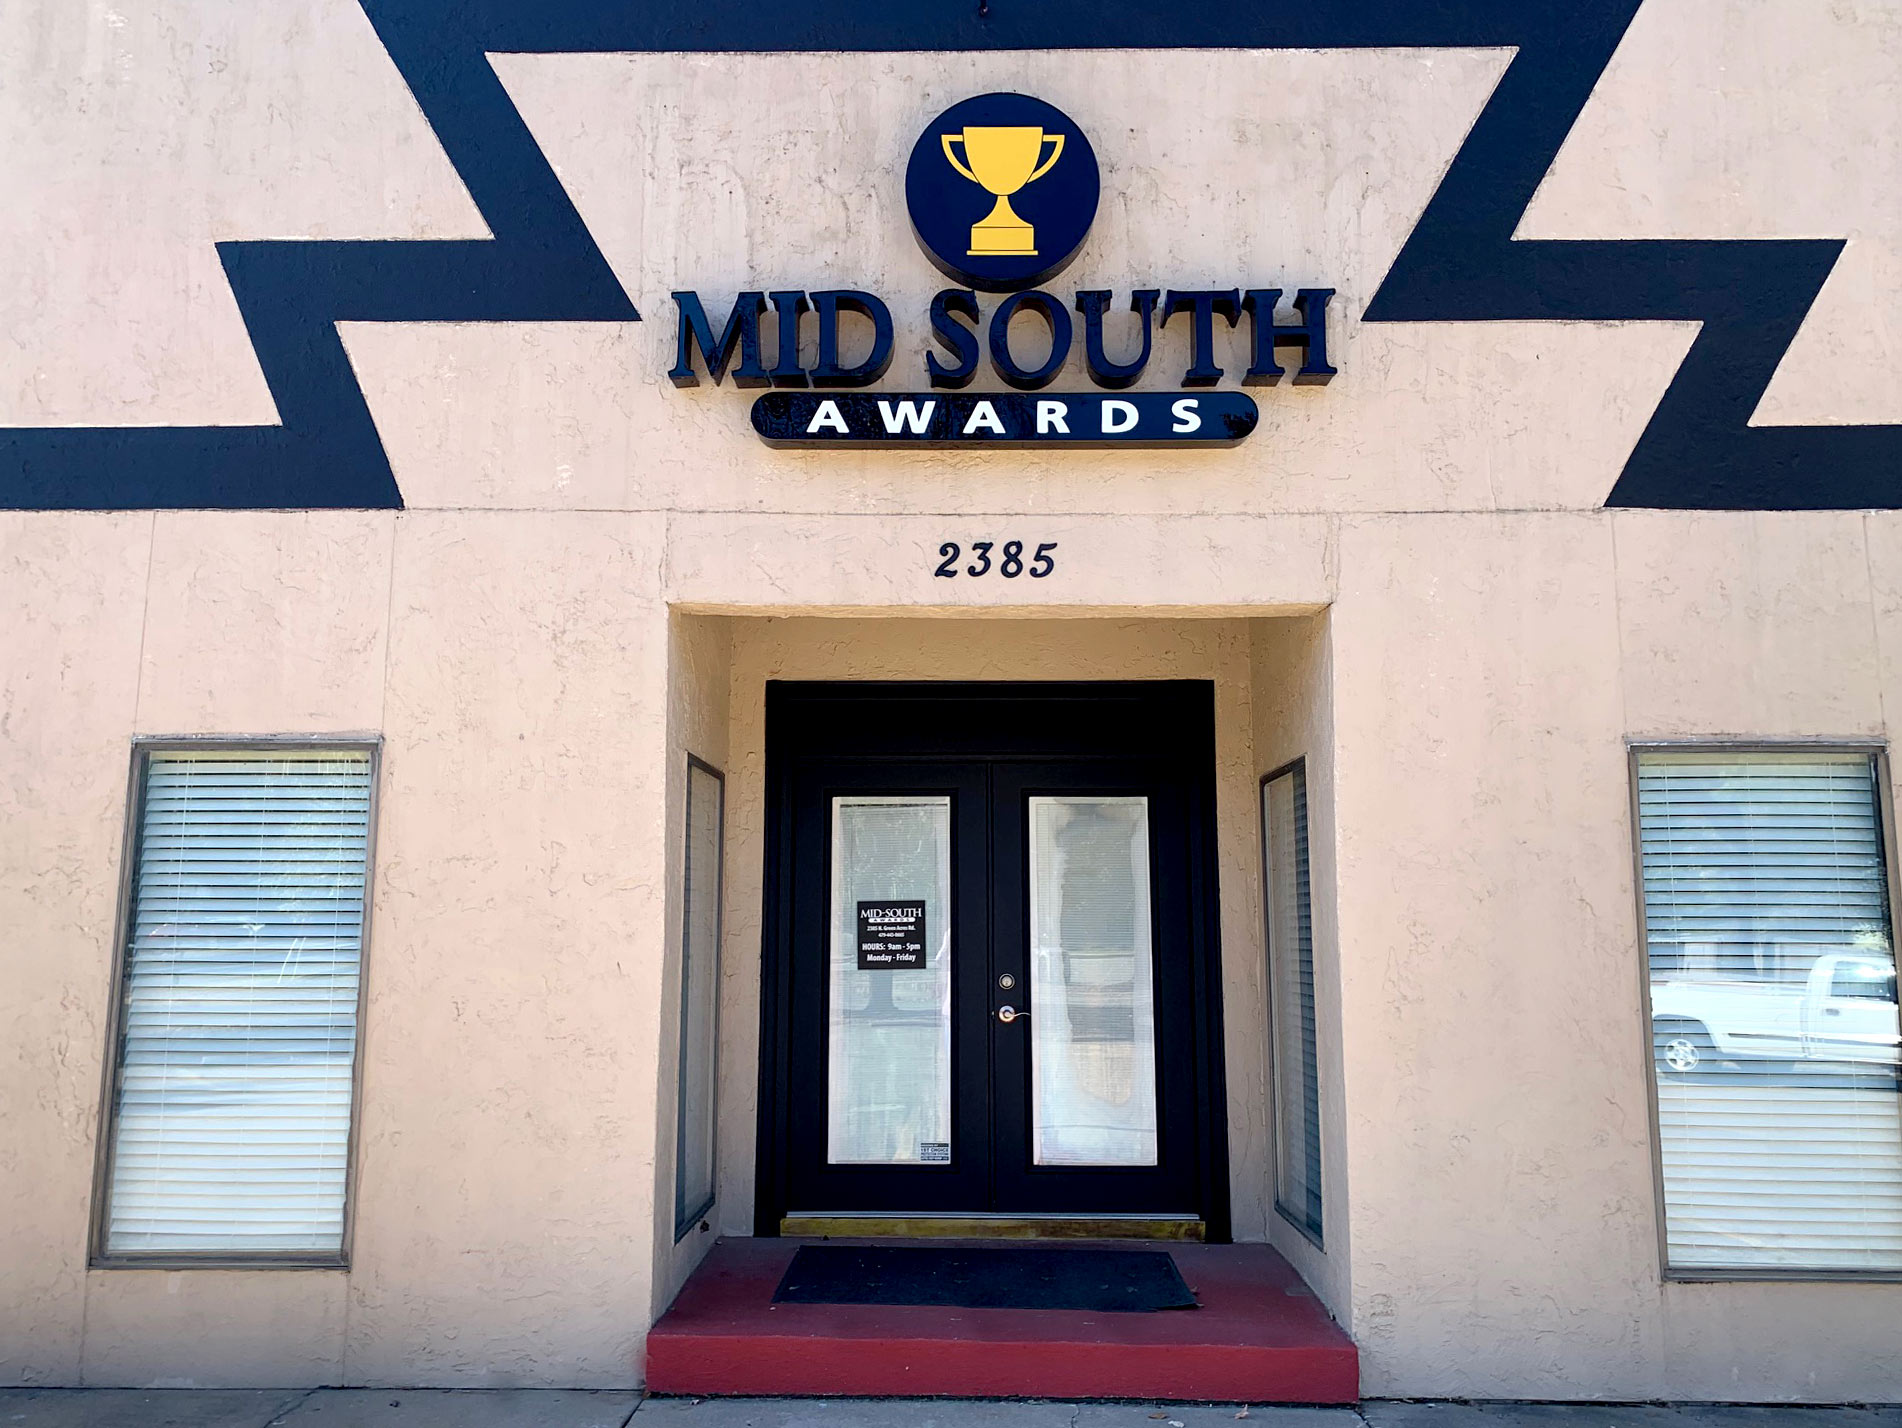 Midsouth Awards location in Colt Square, Fayetteville, Arkansas